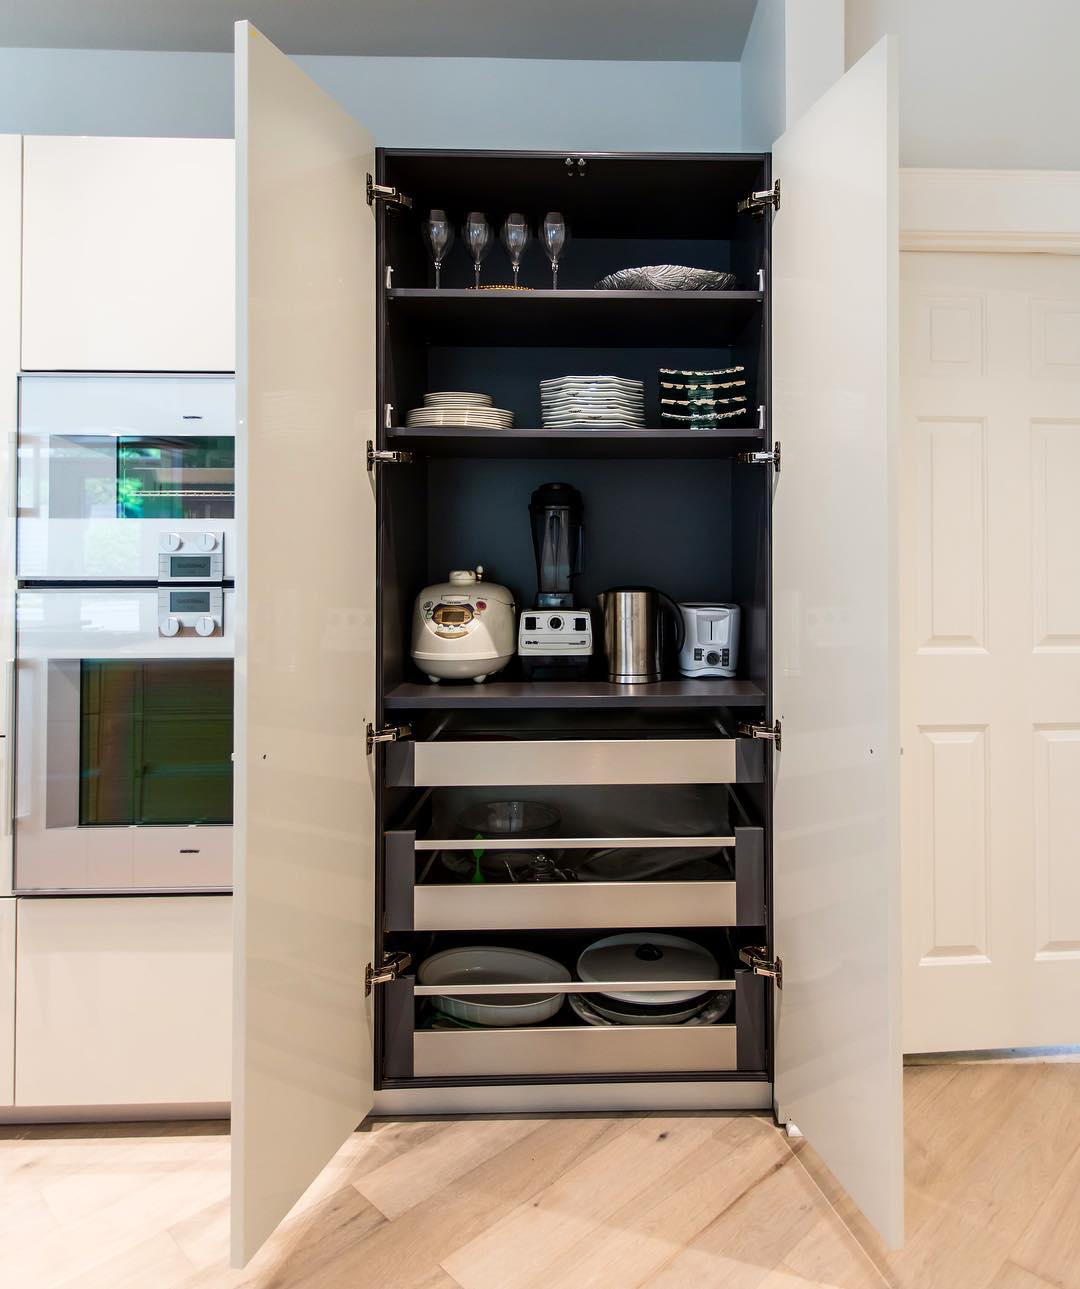 Tall kitchen cabinet with drawers. Photo by Instagram user @pednipdx